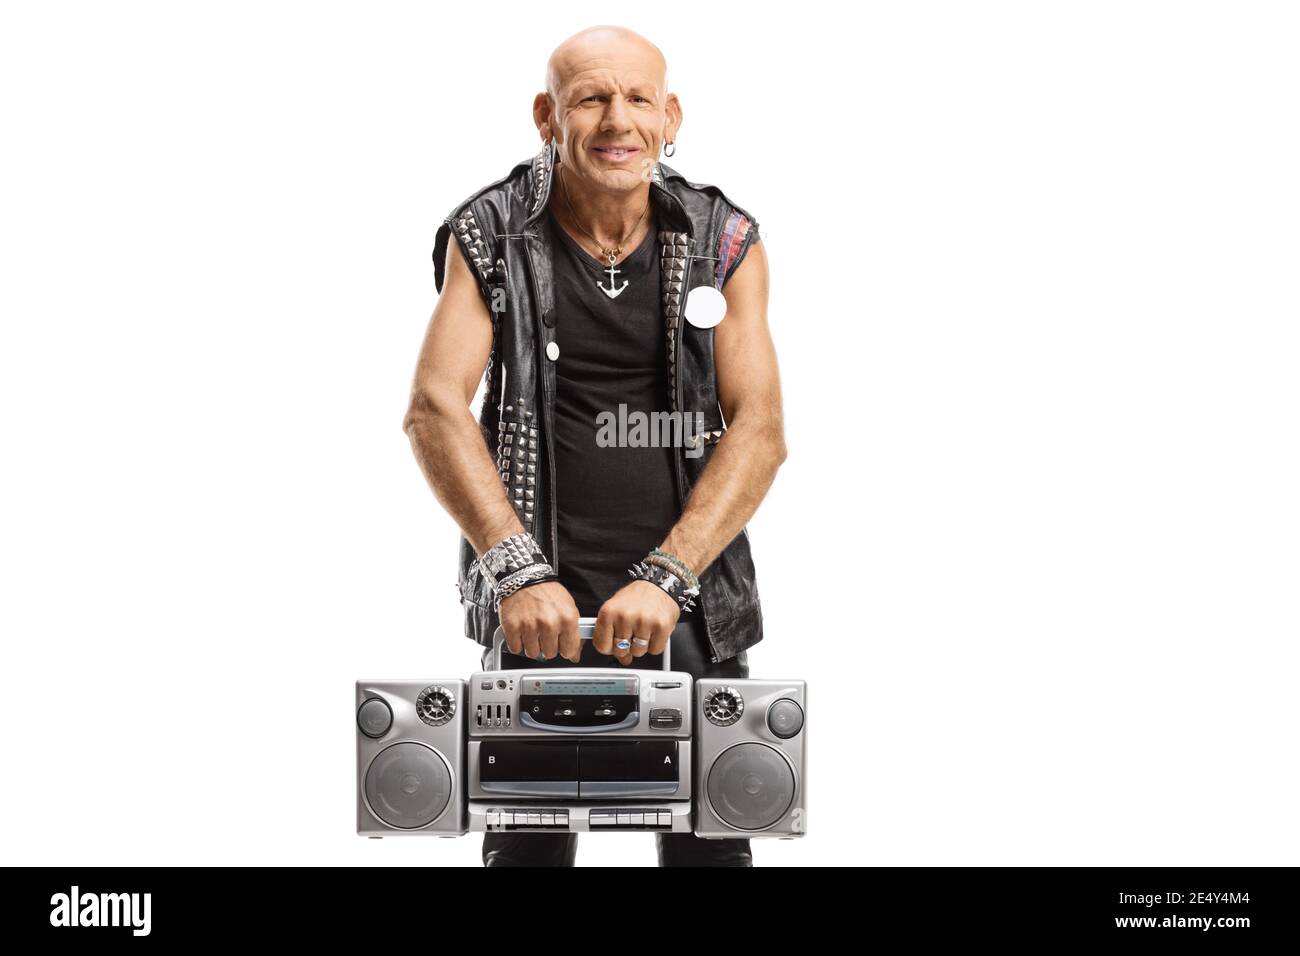 Punk rocker in leather outfit holding a boombox radio isolated on white background Stock Photo